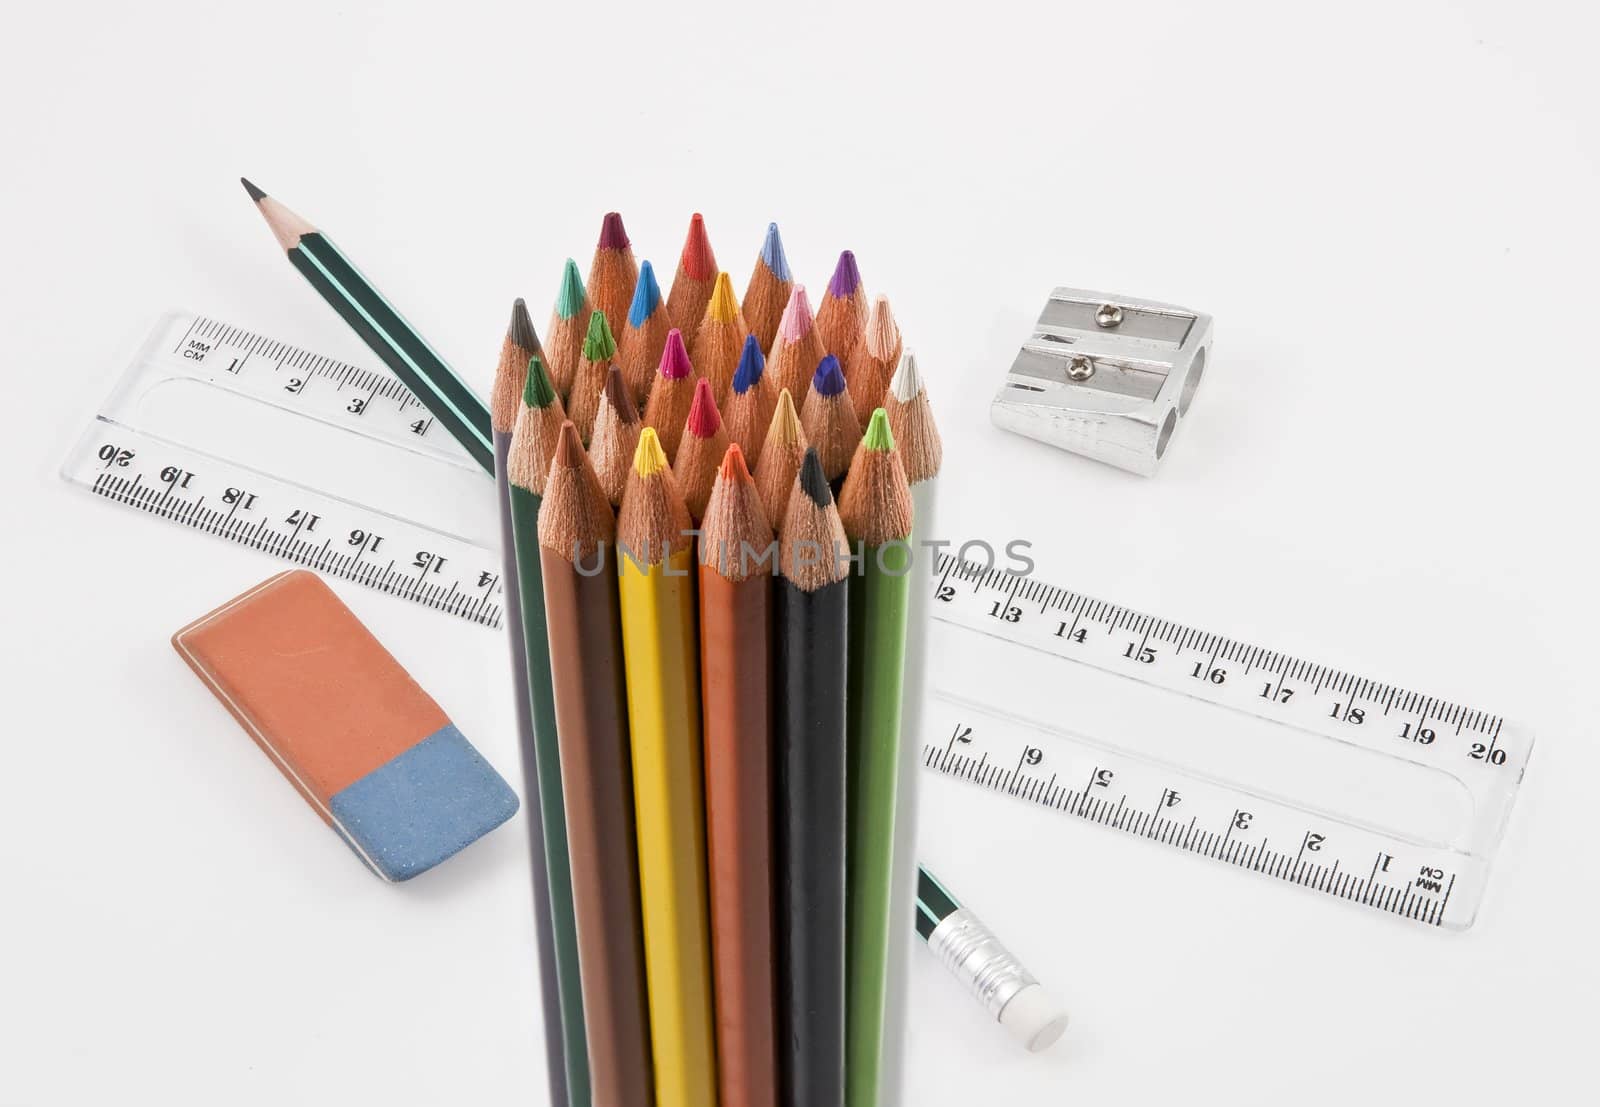 Group of colored pencils with basic school supplies on a white background